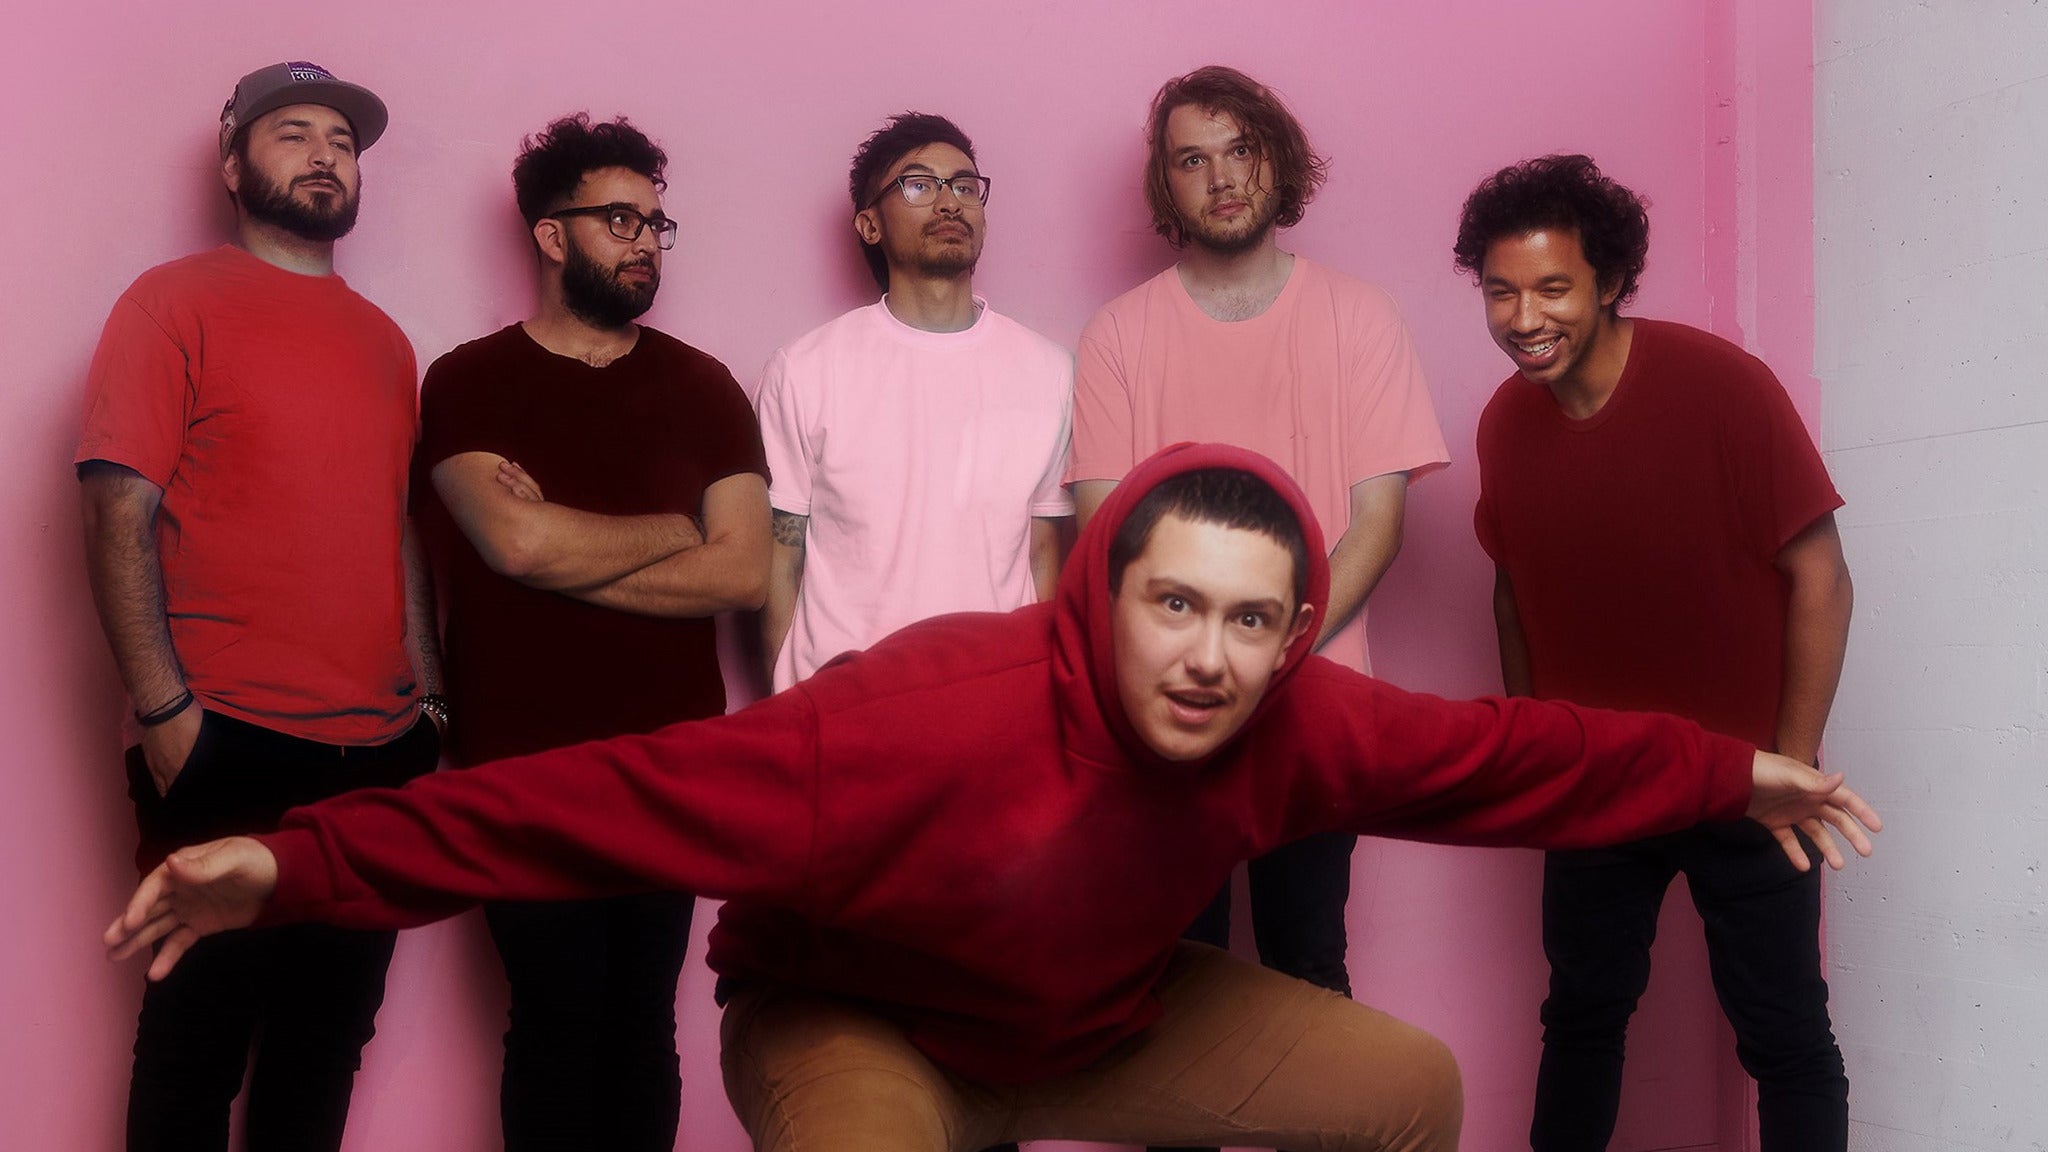 The Fall Tour of Hobo Johnson & the Lovemakers in Sacramento promo photo for Ticketmaster presale offer code